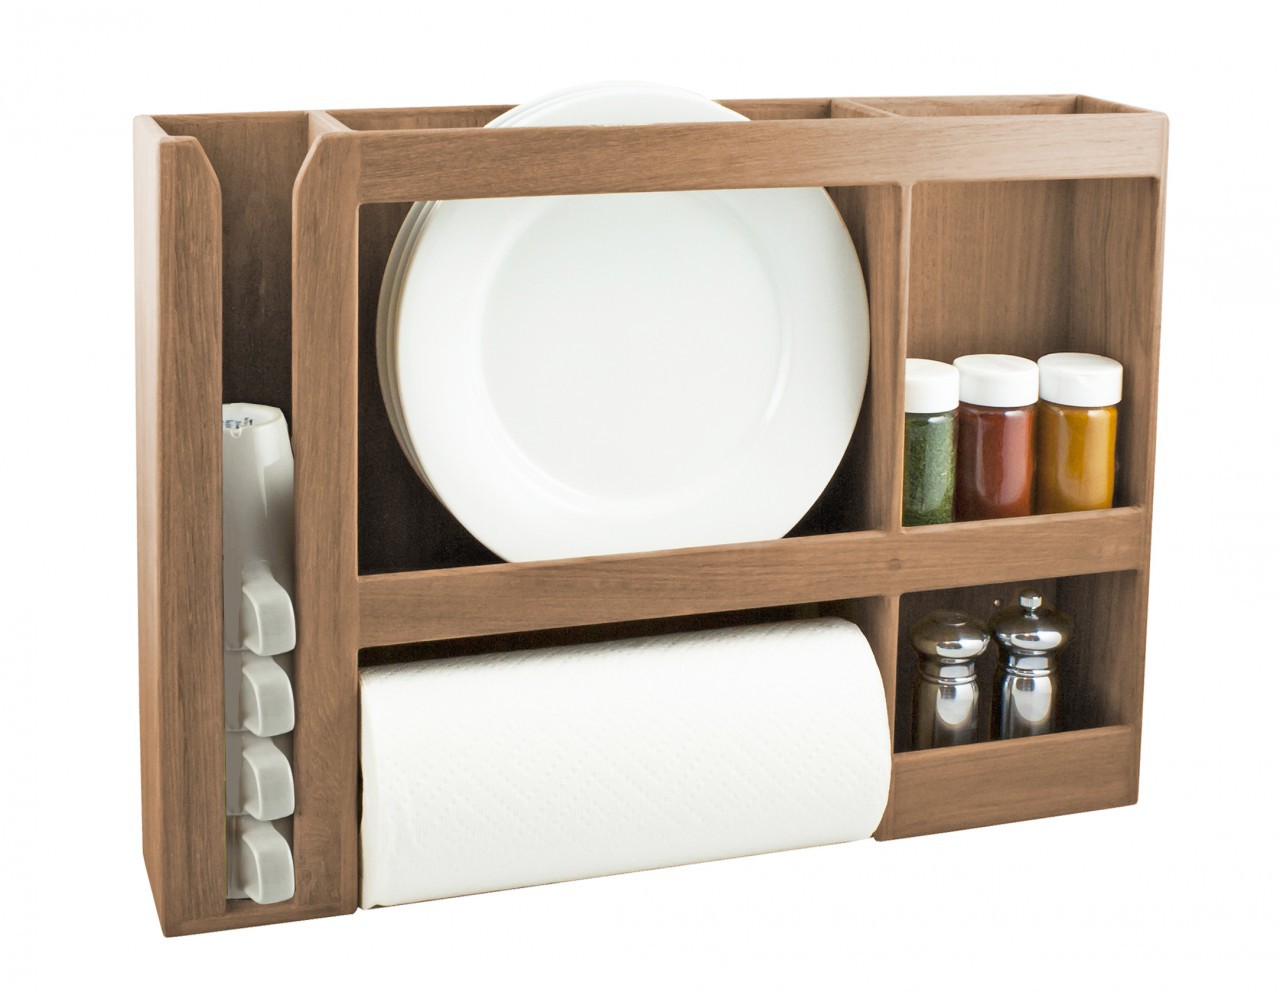 A SeaTeak dish/cup/spice/towel rack is storing plates, a paper towel roll, spices, and cups.